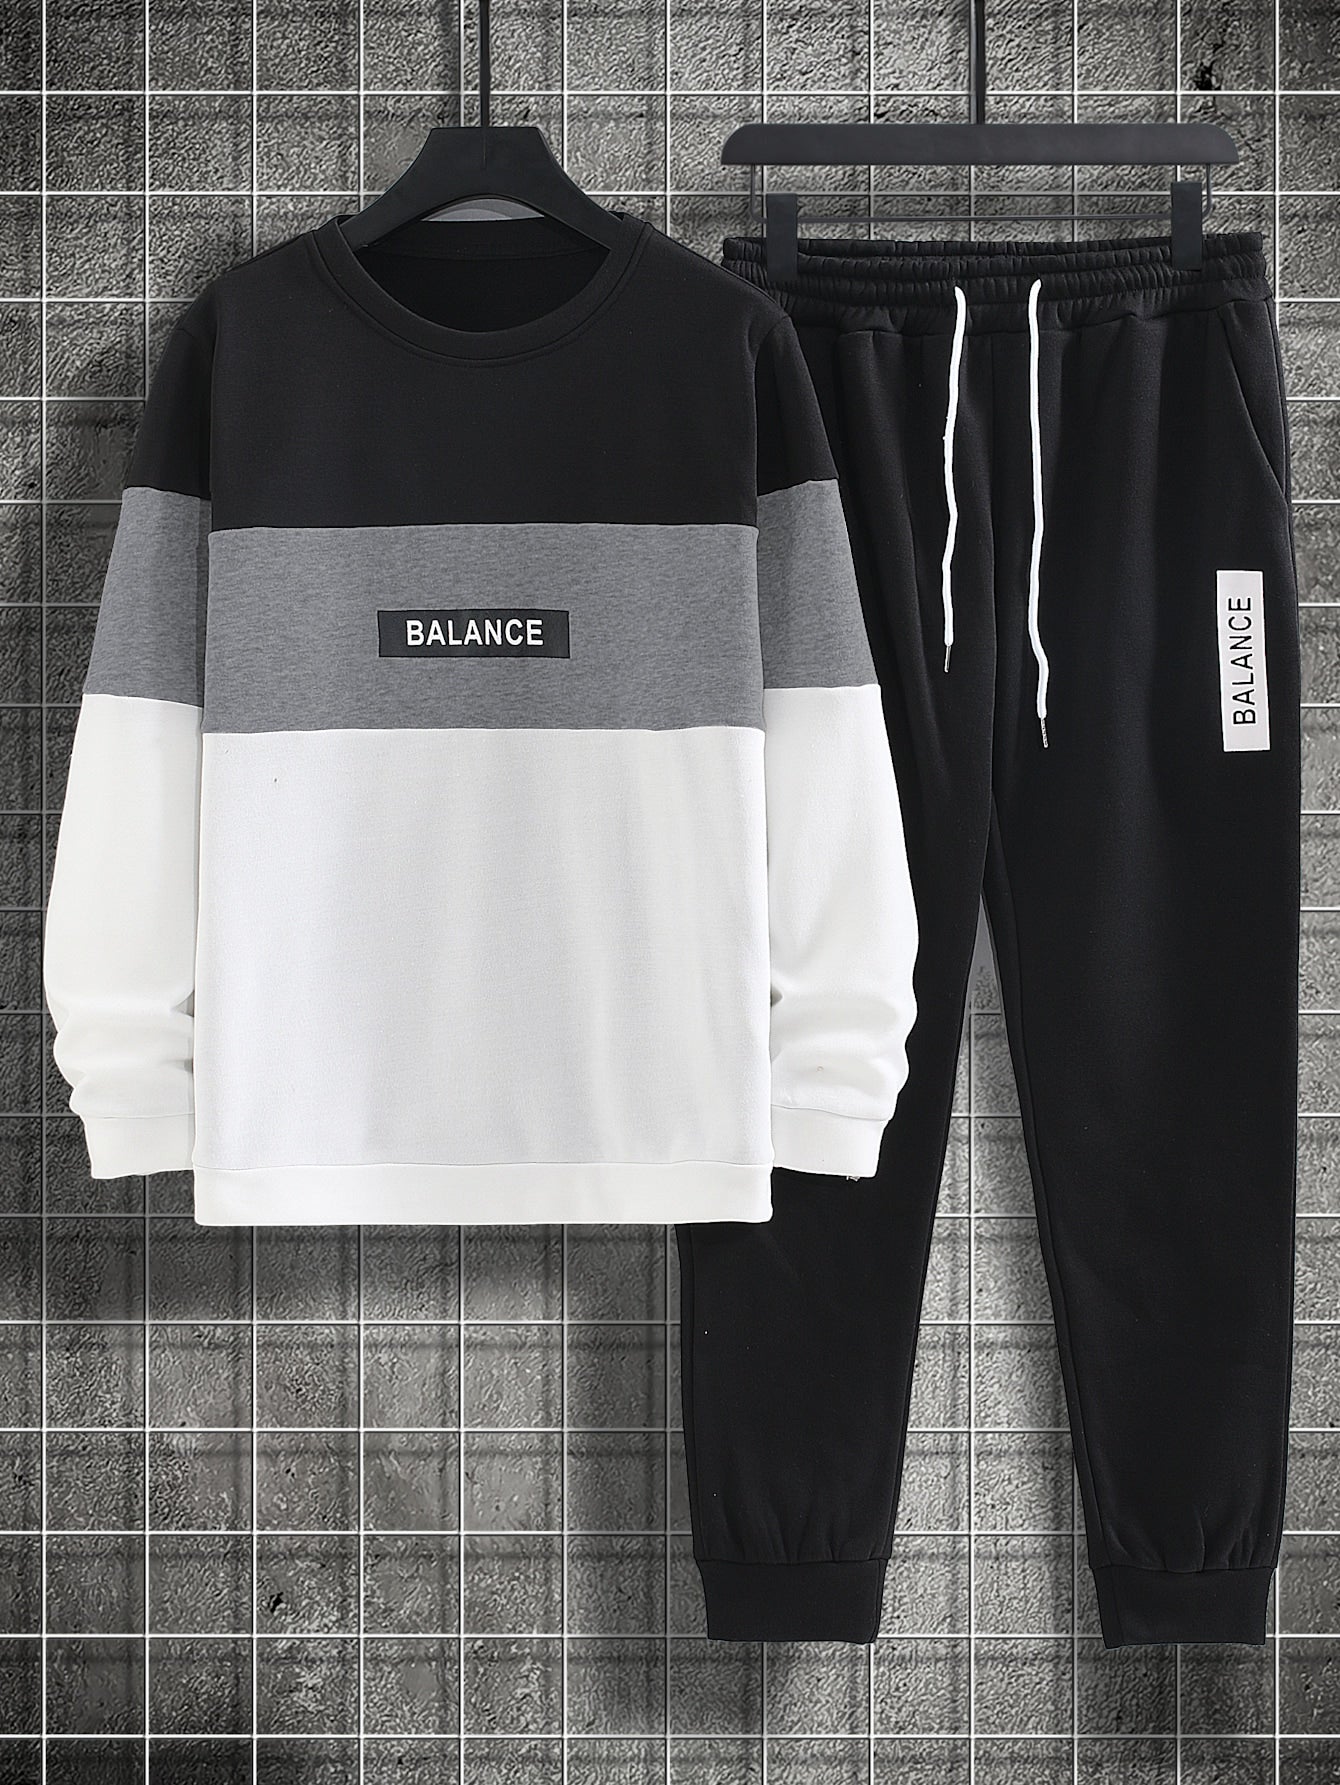 Men Colorblock Letter Graphic Thermal Pullover Drawstring Waist Sweatpants